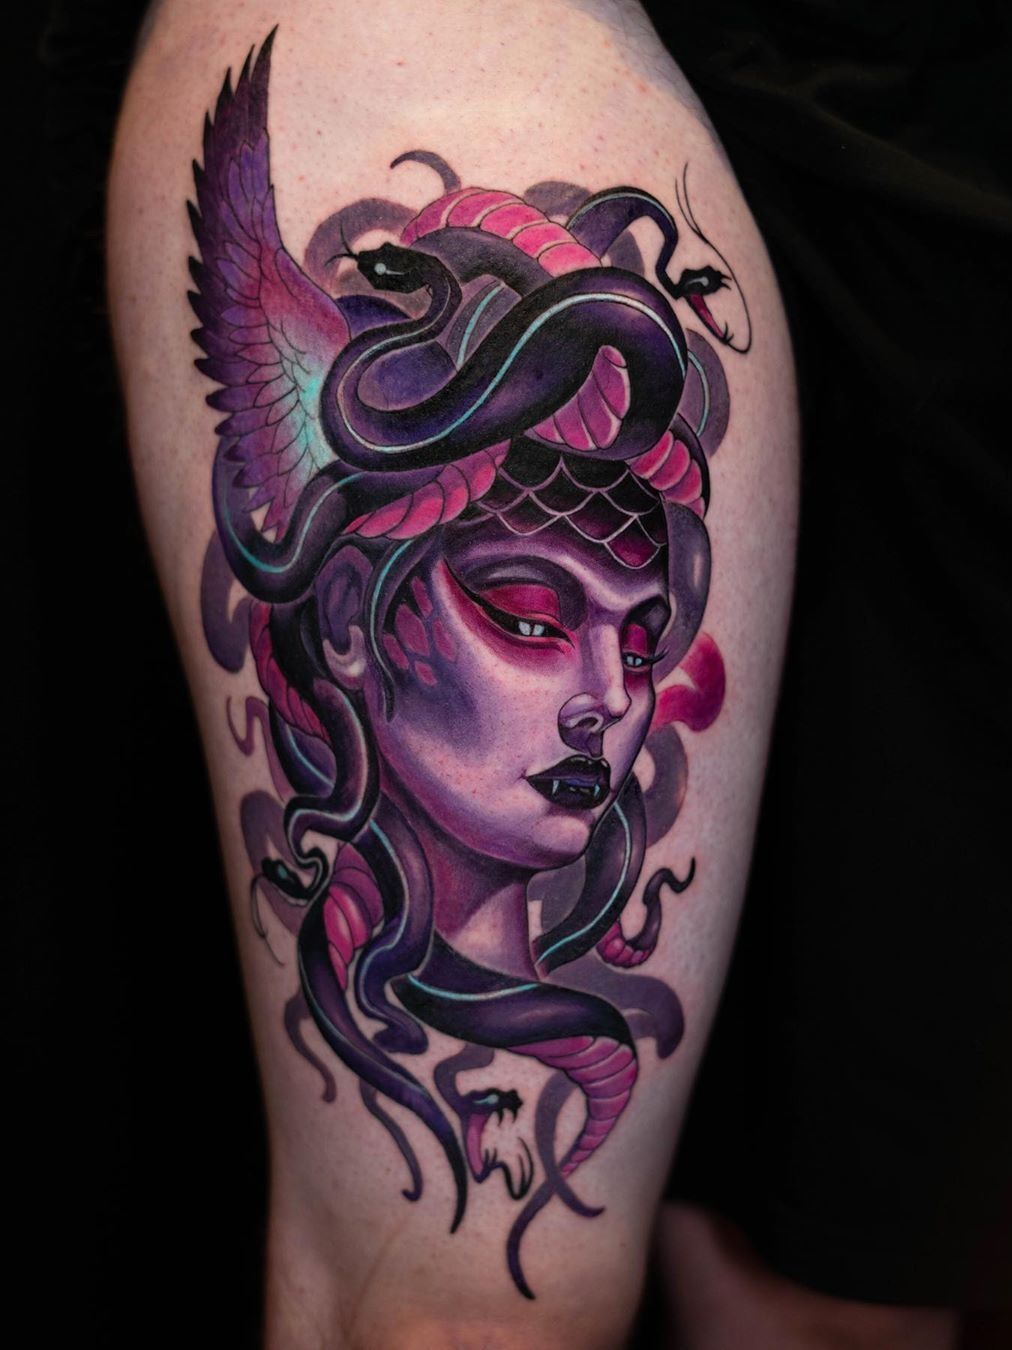 Medusa Tattoo These 35 Ideas Will Either Scare You Or Make You Get One